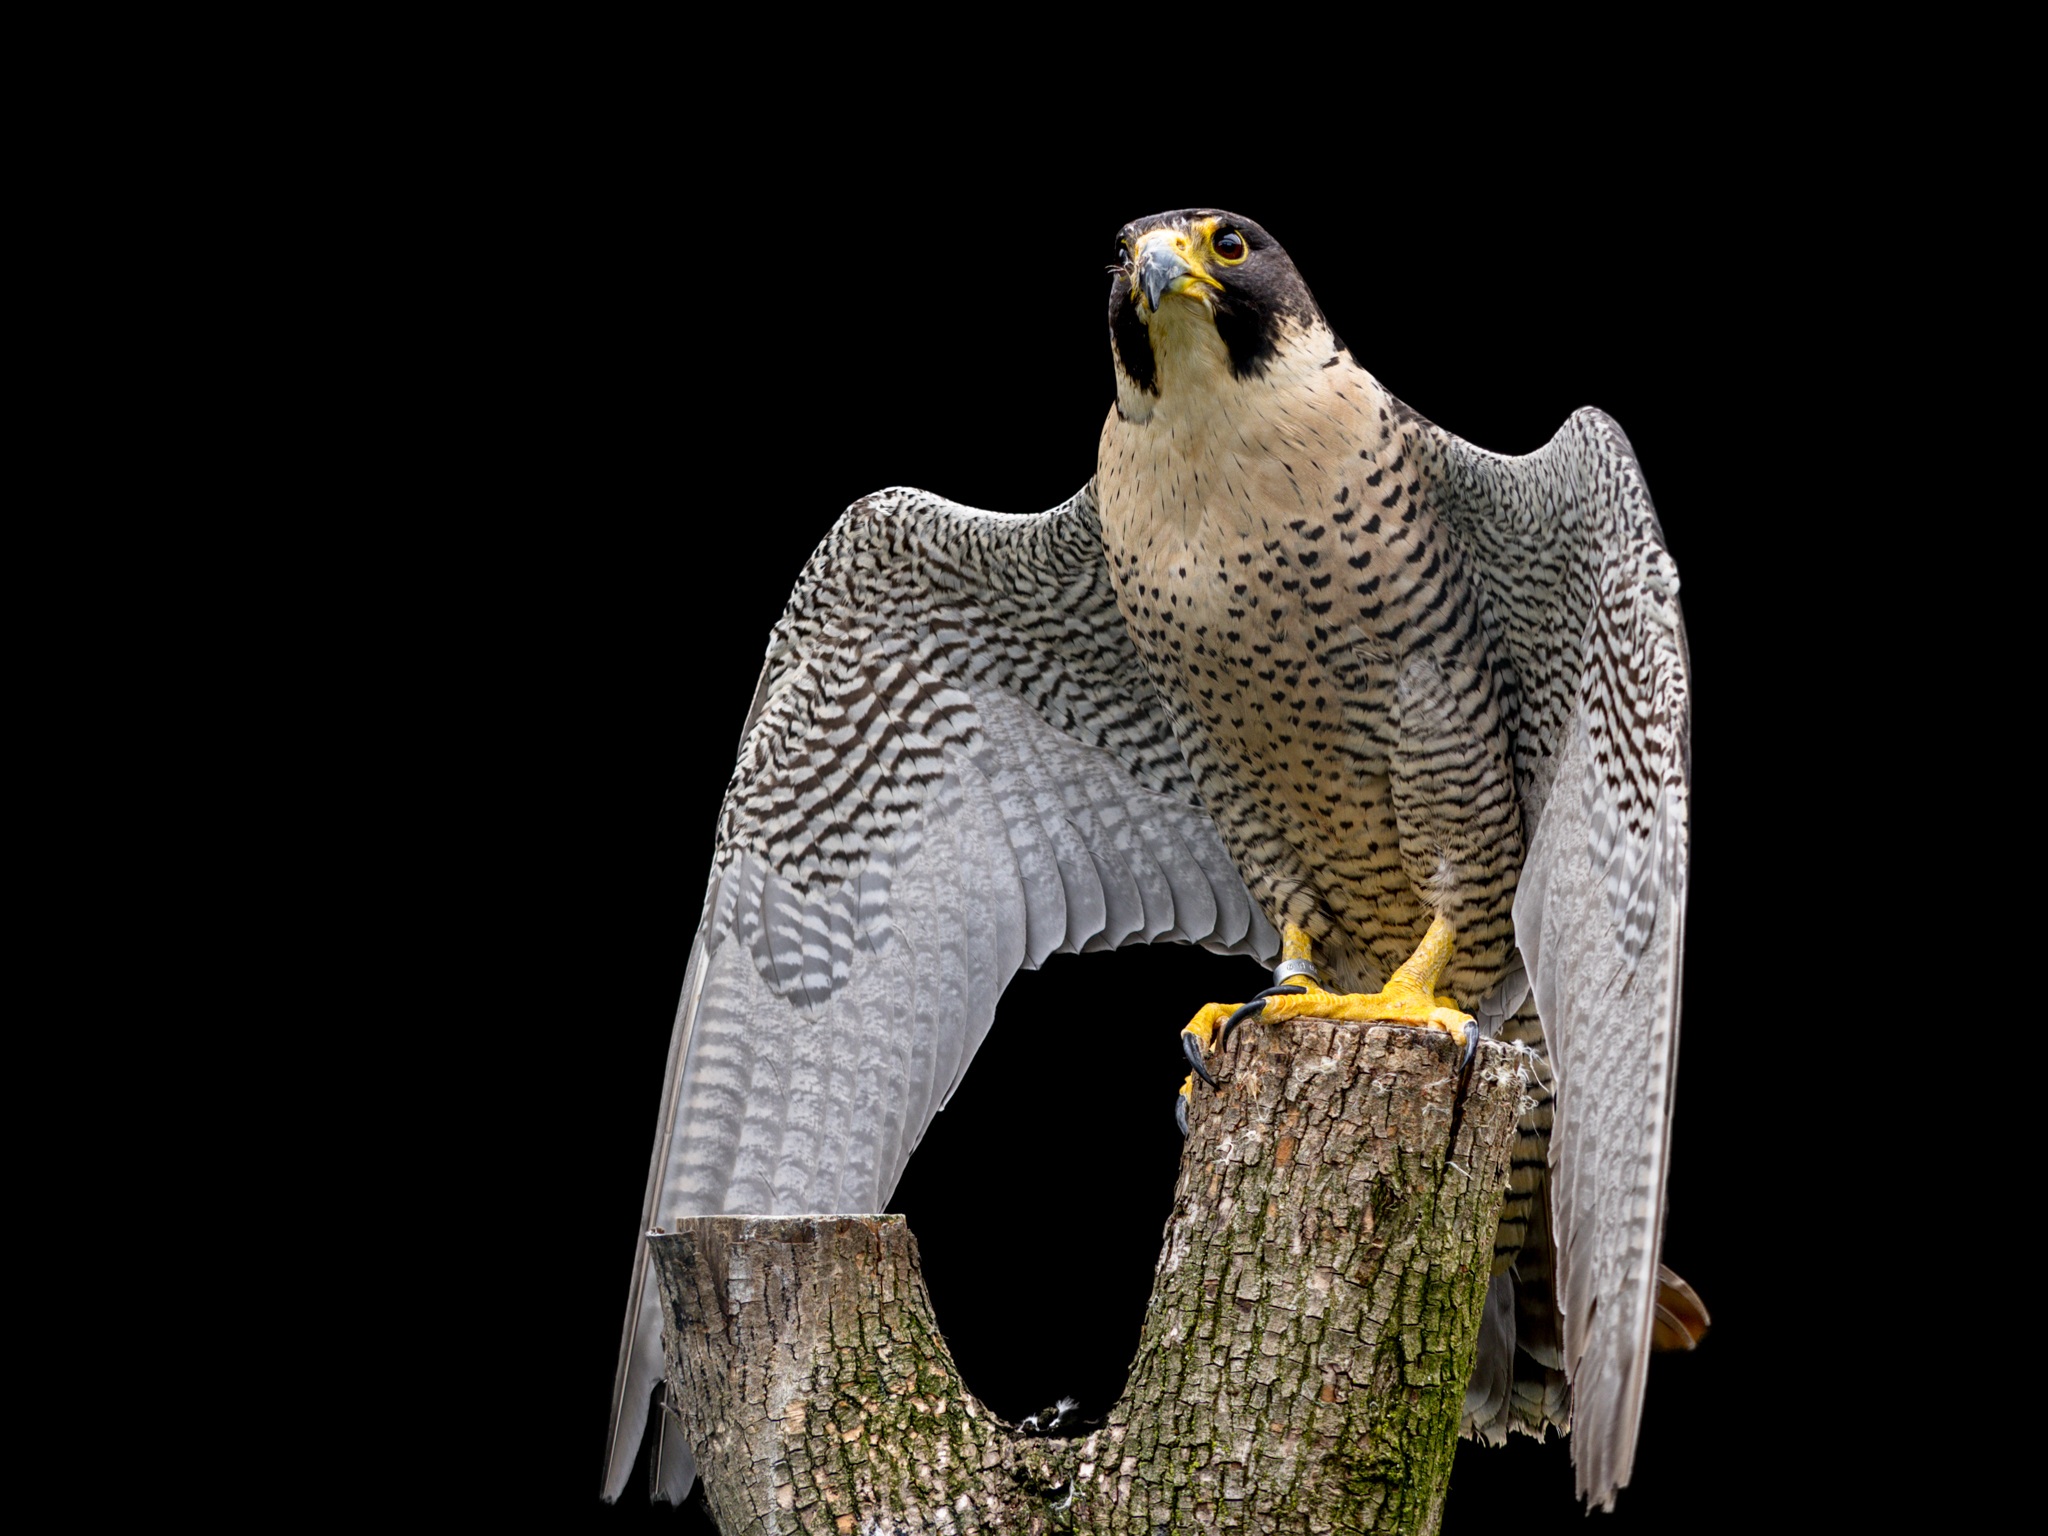 Peregrine falcon on a Tree Log by Gerry